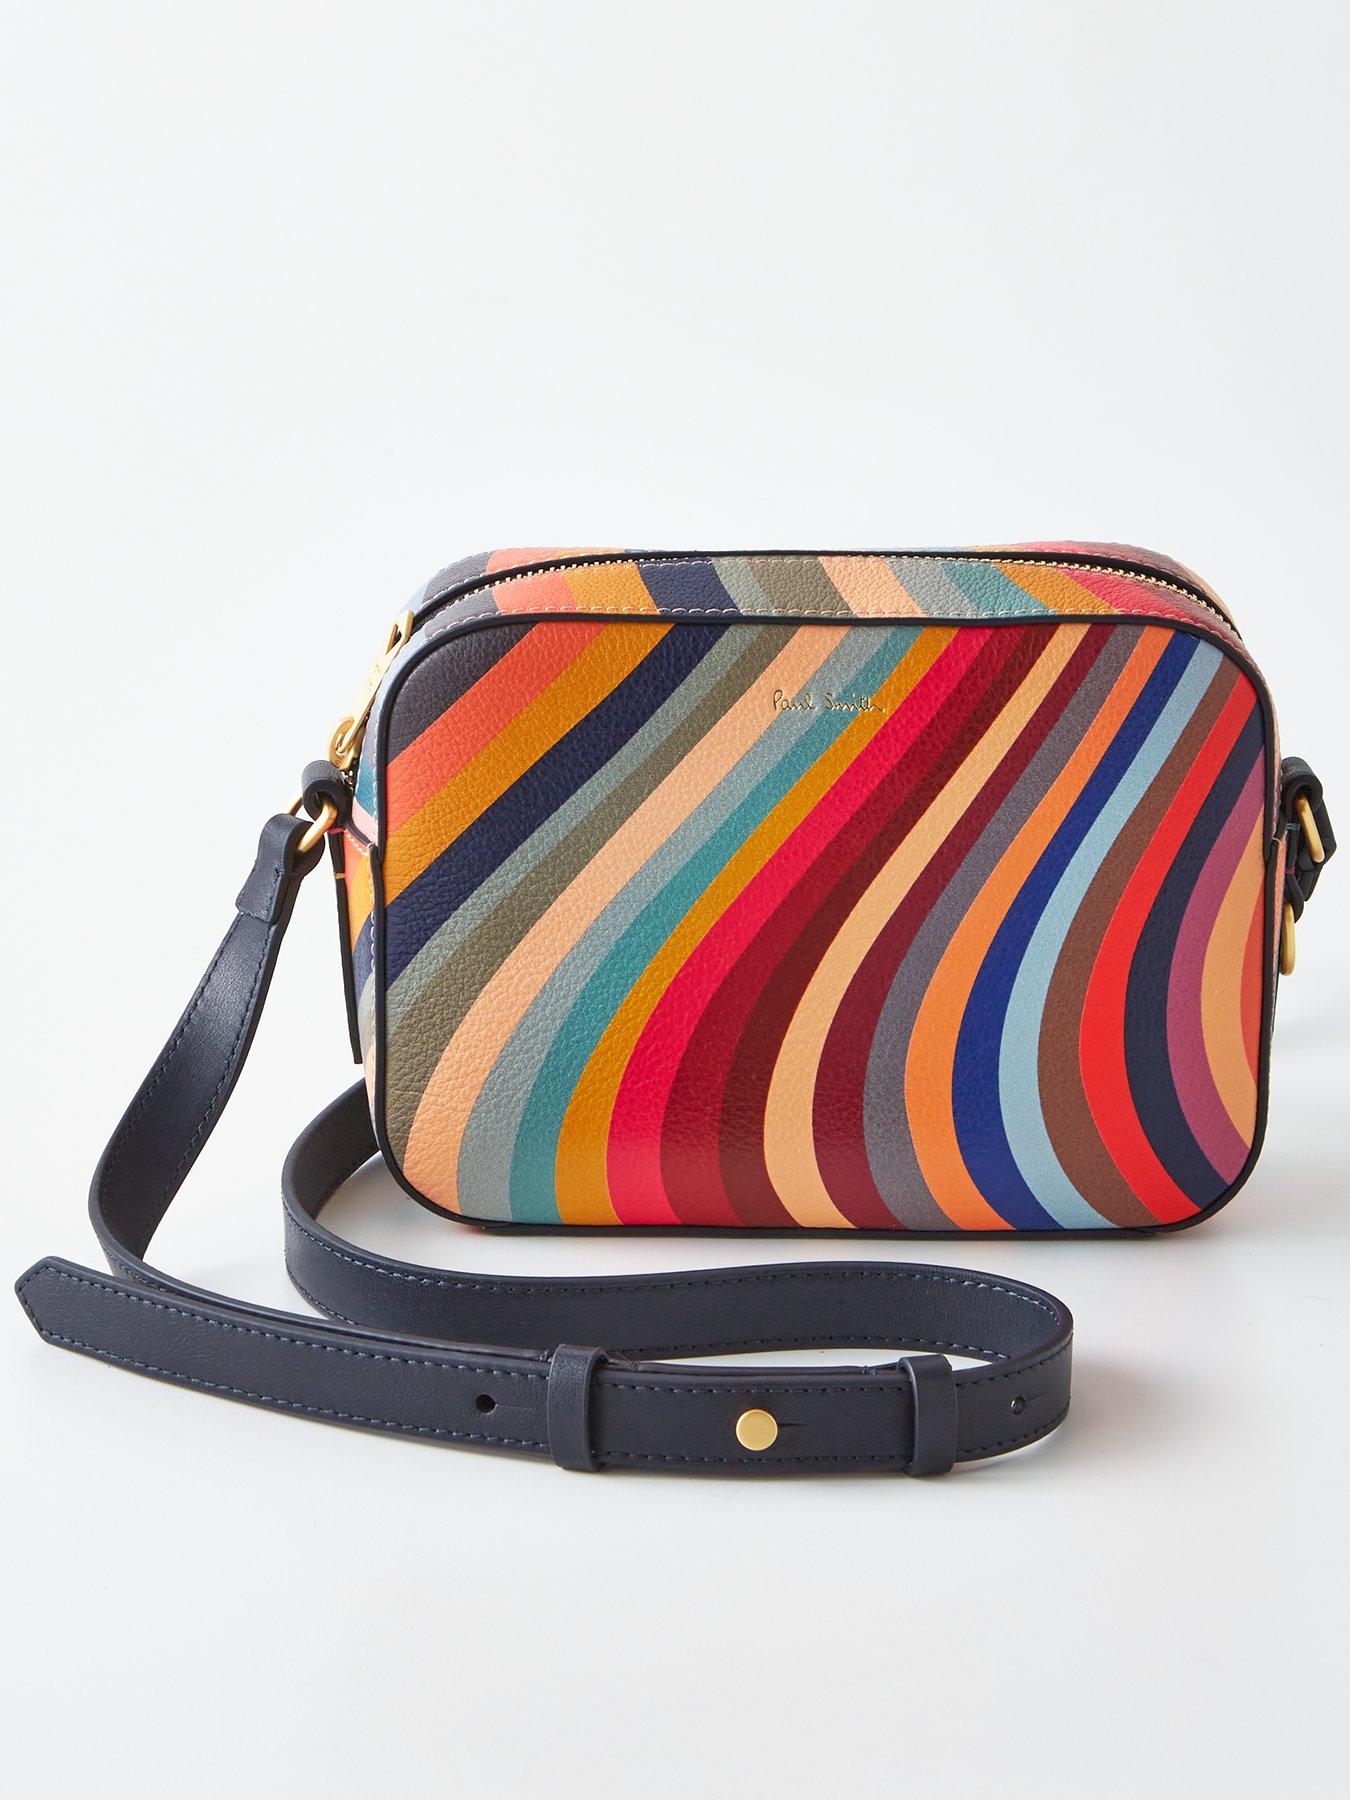 Paul Smith Swirl Leather Shoulder Bag in Red